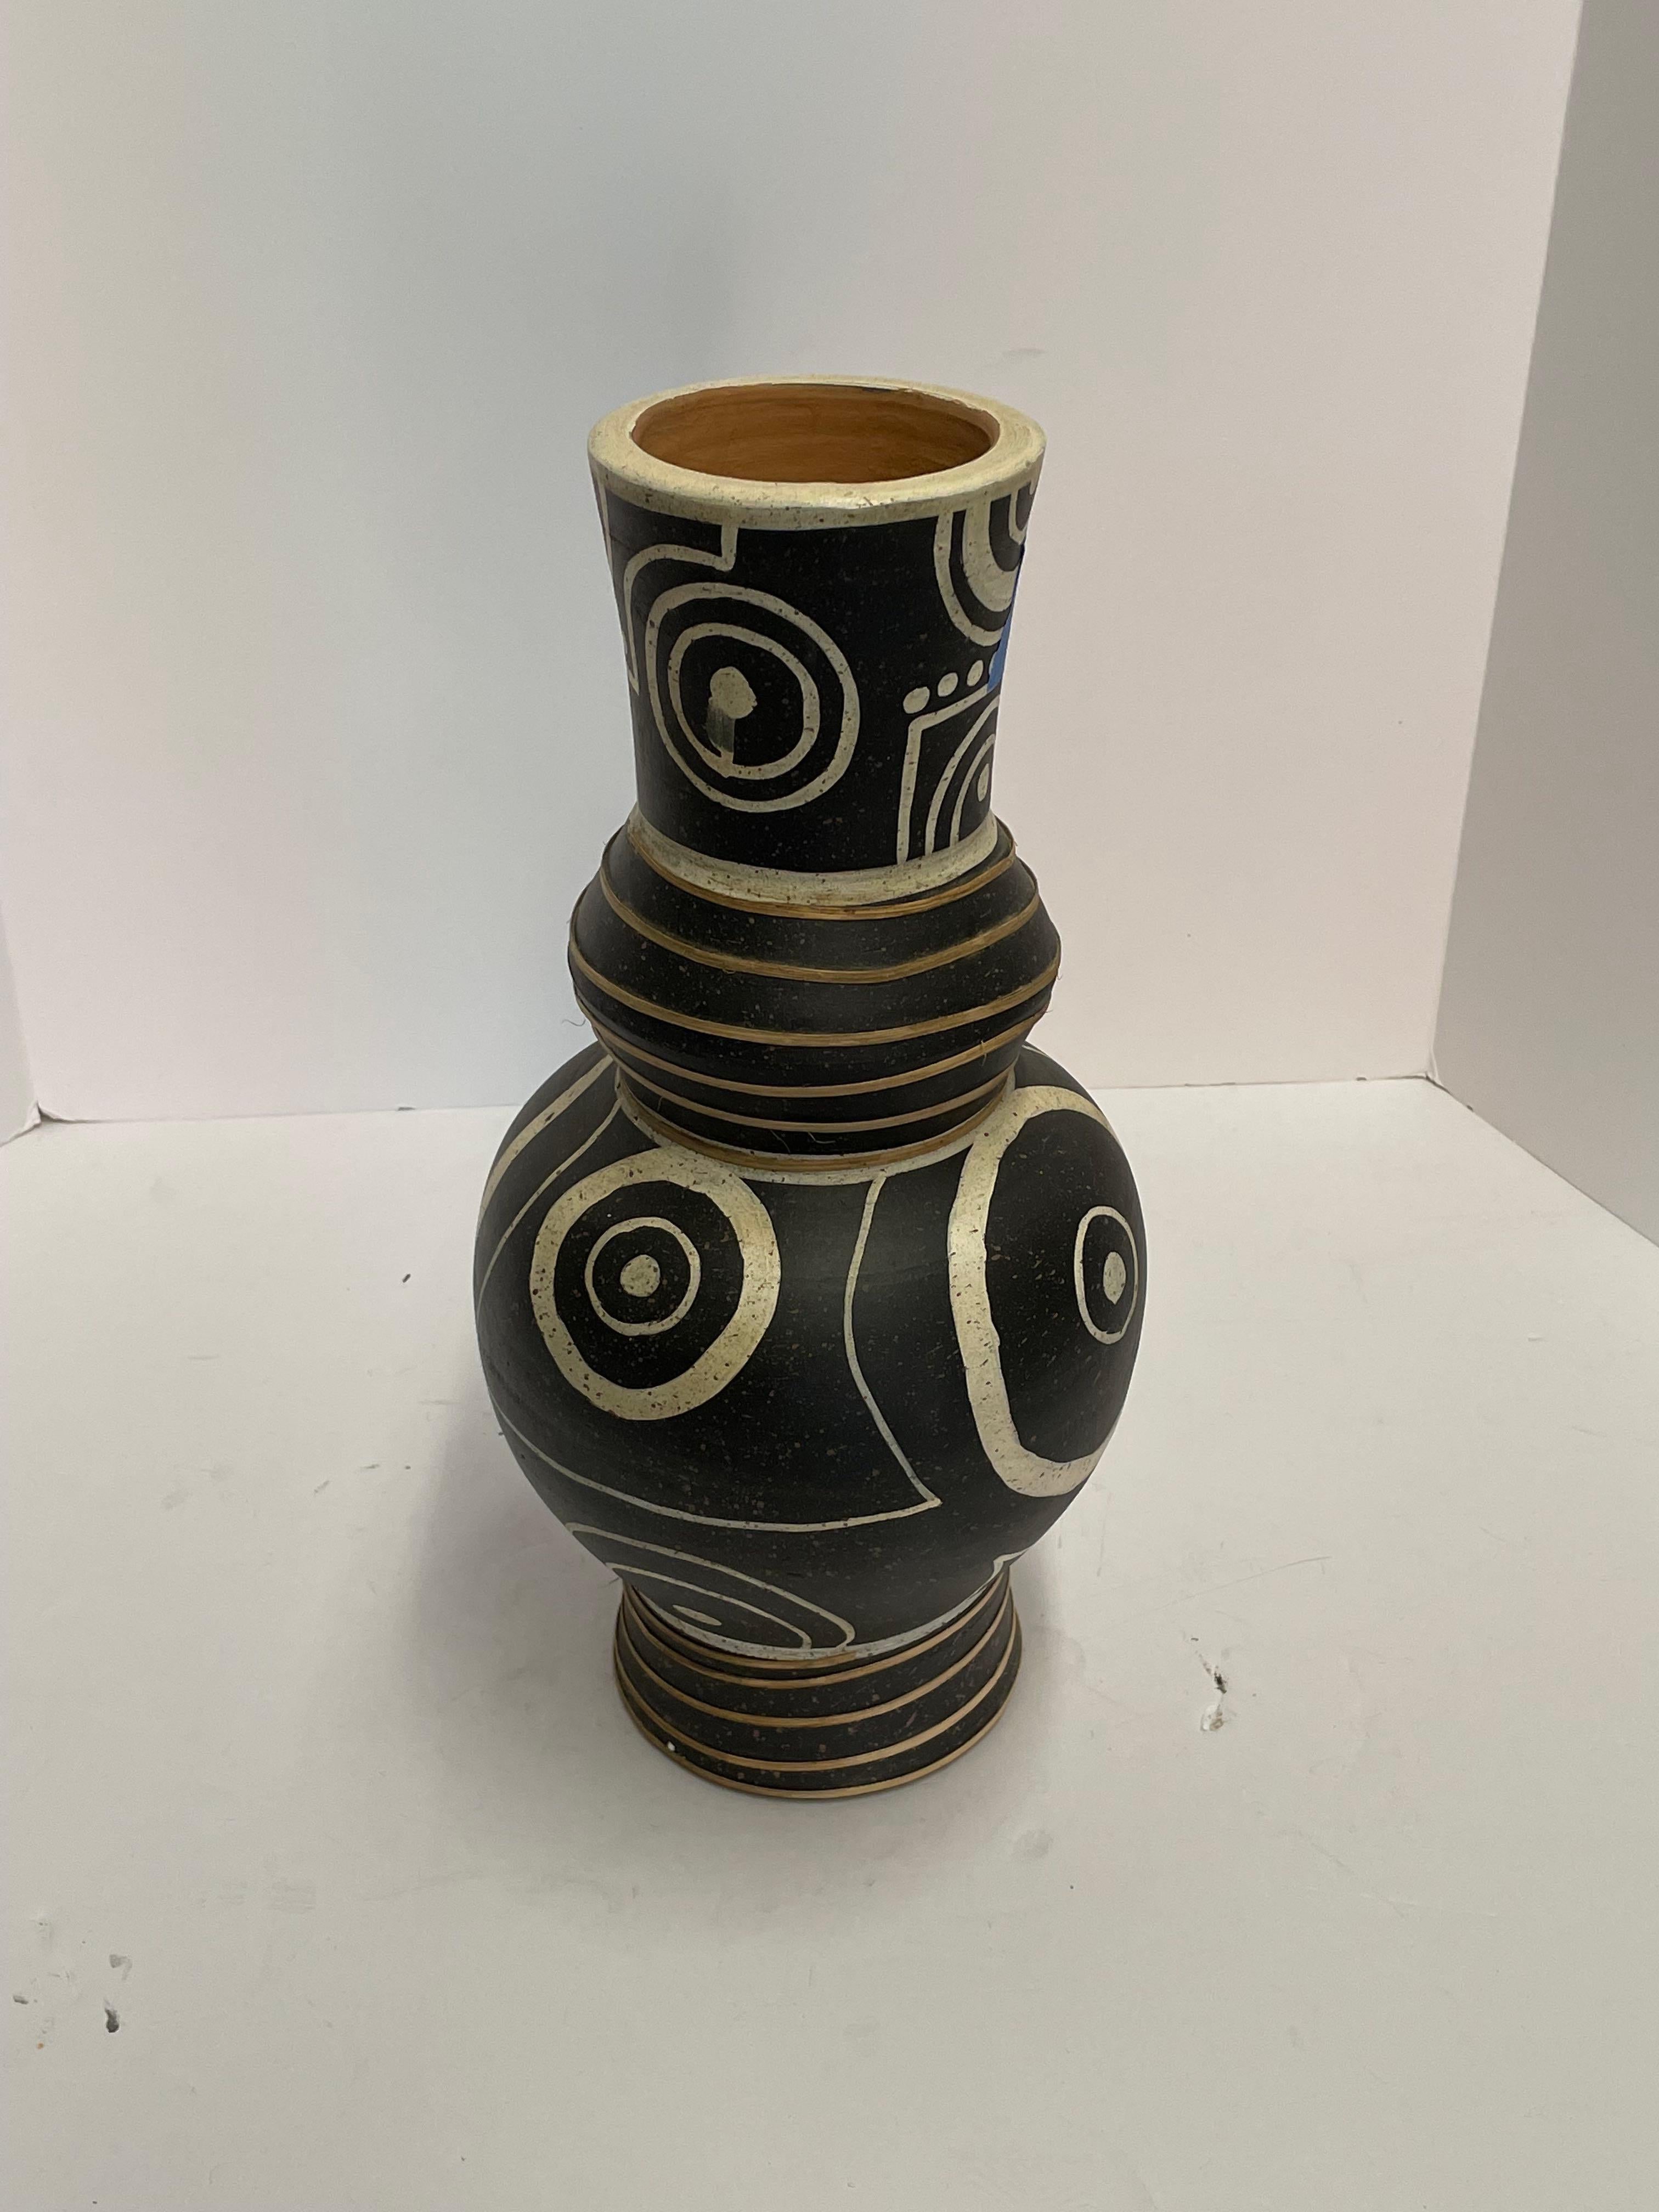 Contemporary Chinese black and white tribal pattern vase.
Decorative tribal dot within circle pattern.